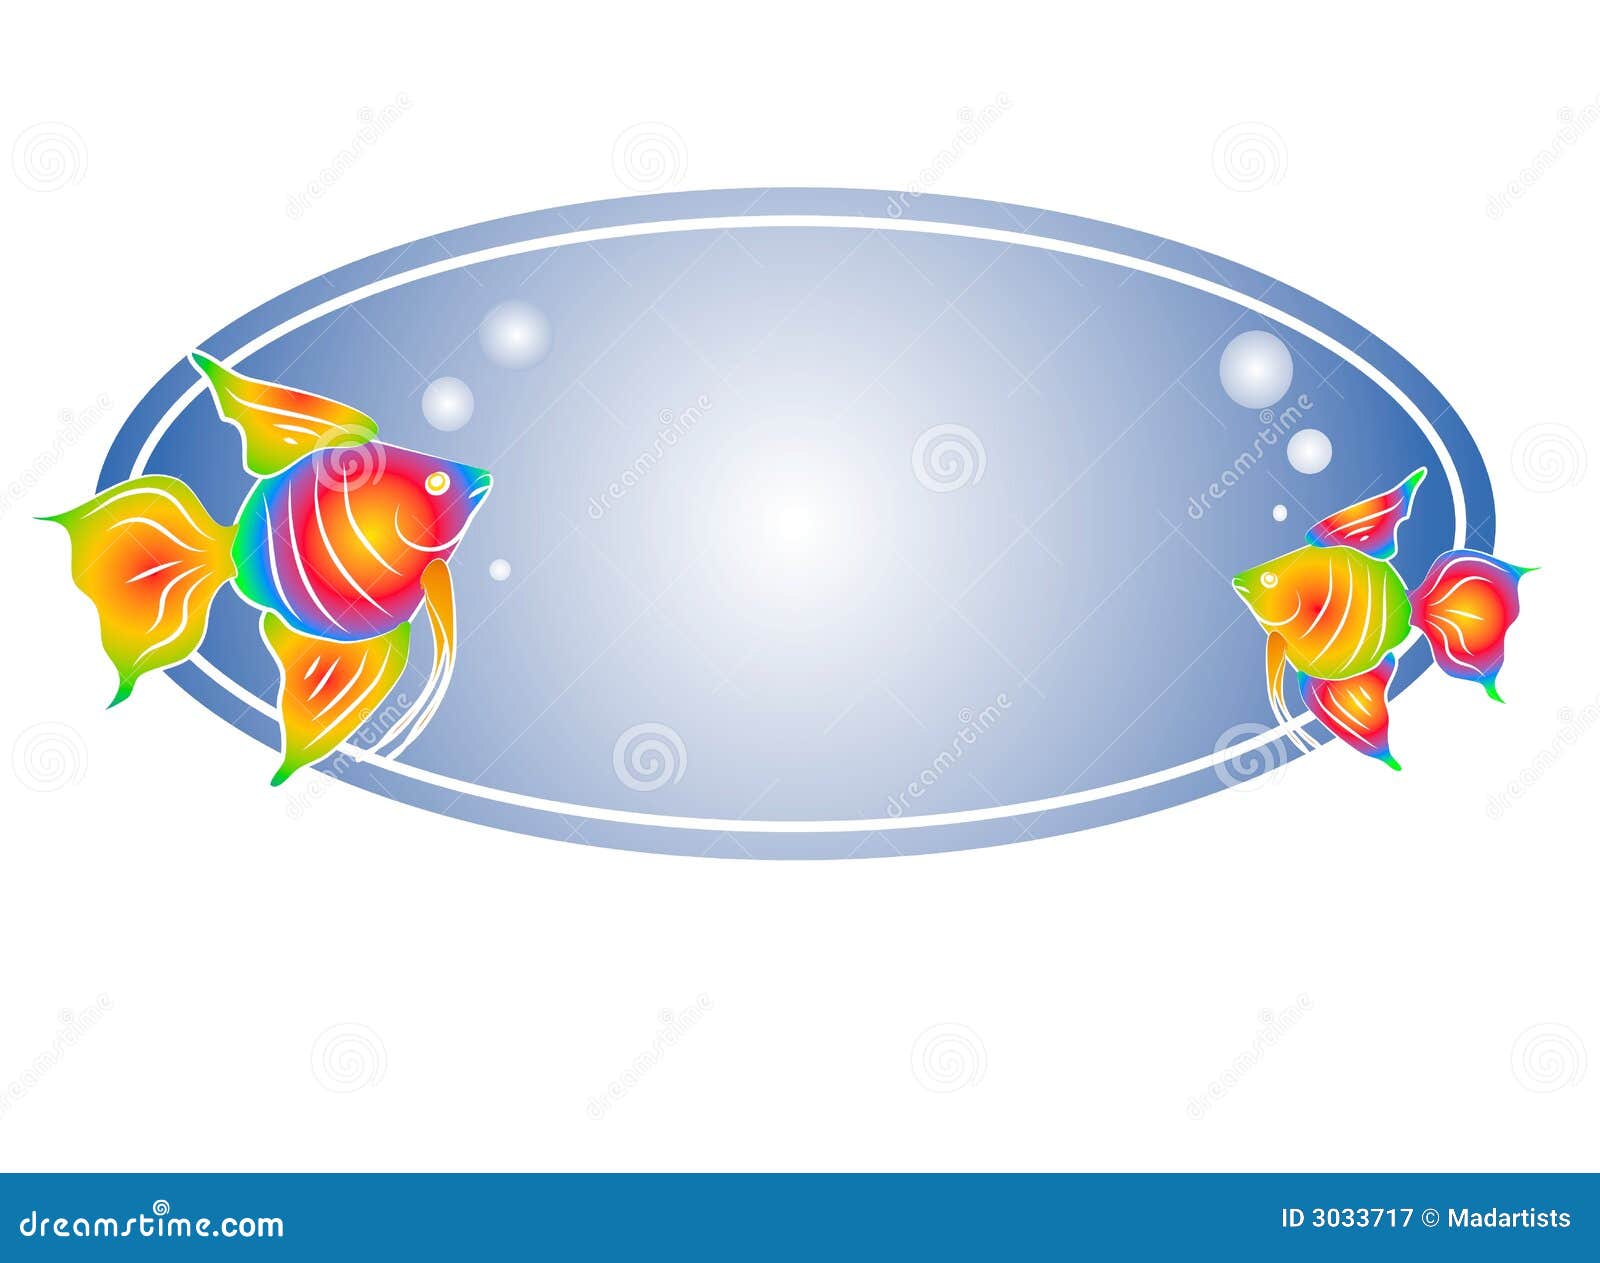 clipart of fish in water - photo #47